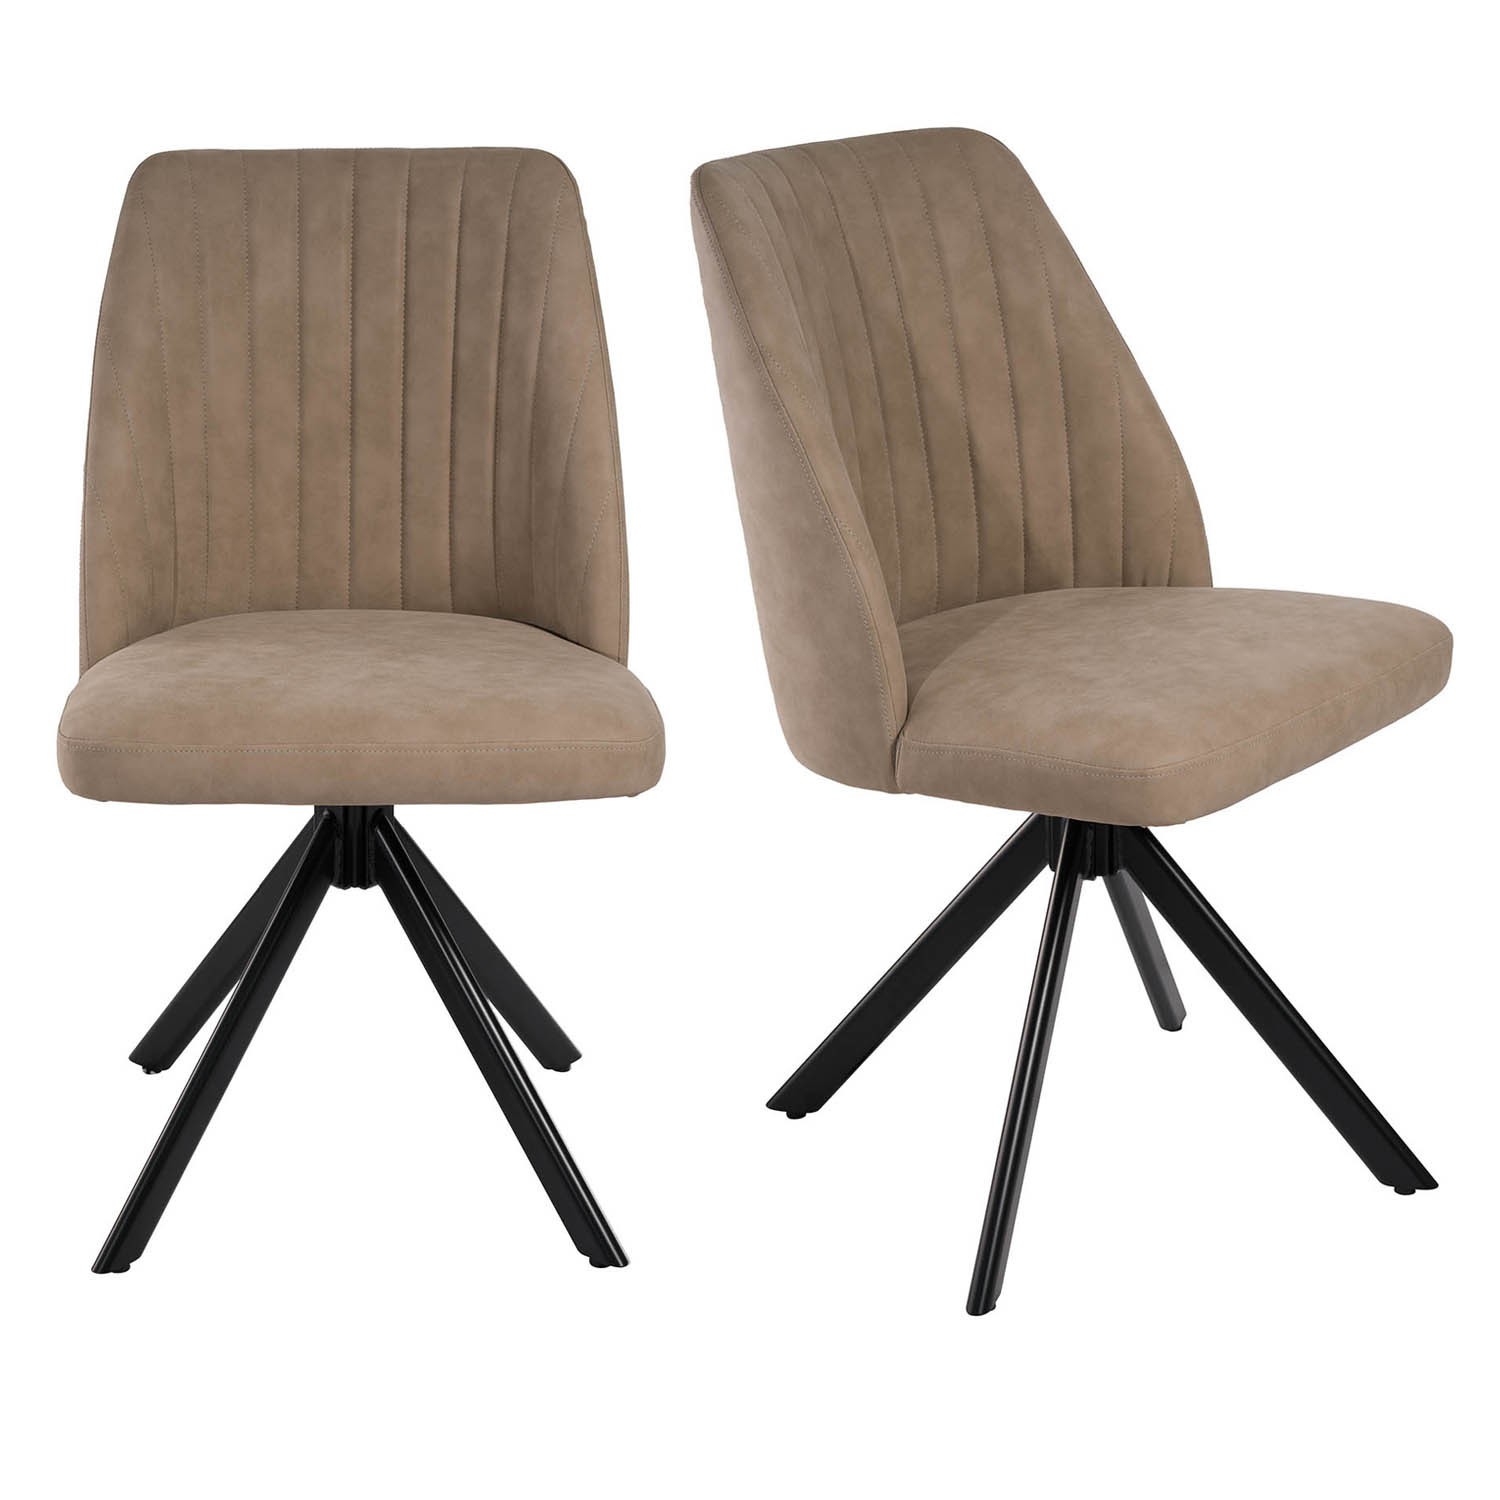 Photo of Set of 2 beige faux leather swivel dining chairs - logan